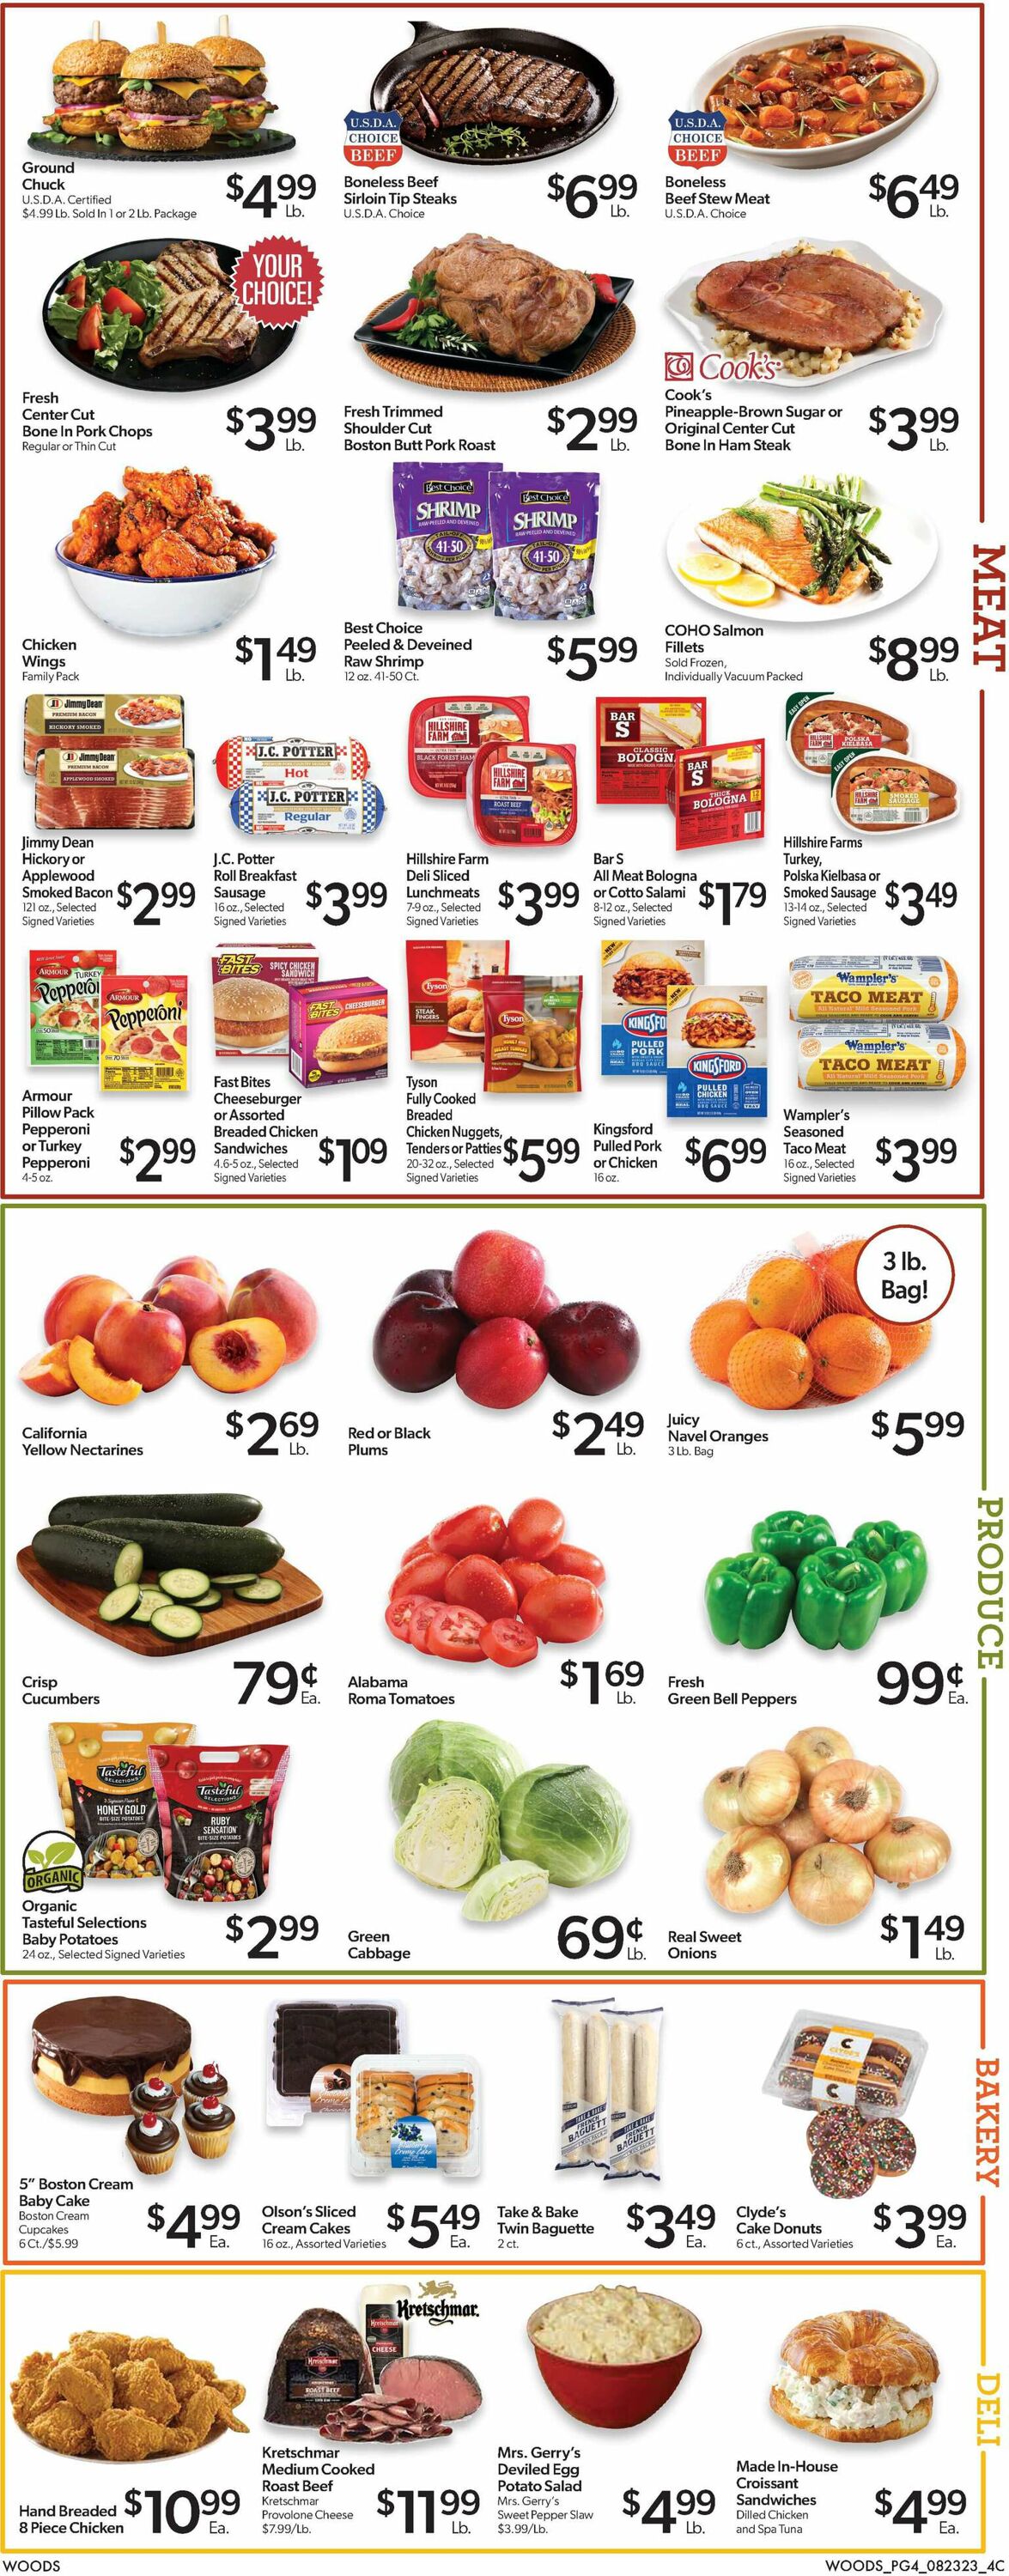 Woods Supermarket Ad from 08/23/2023